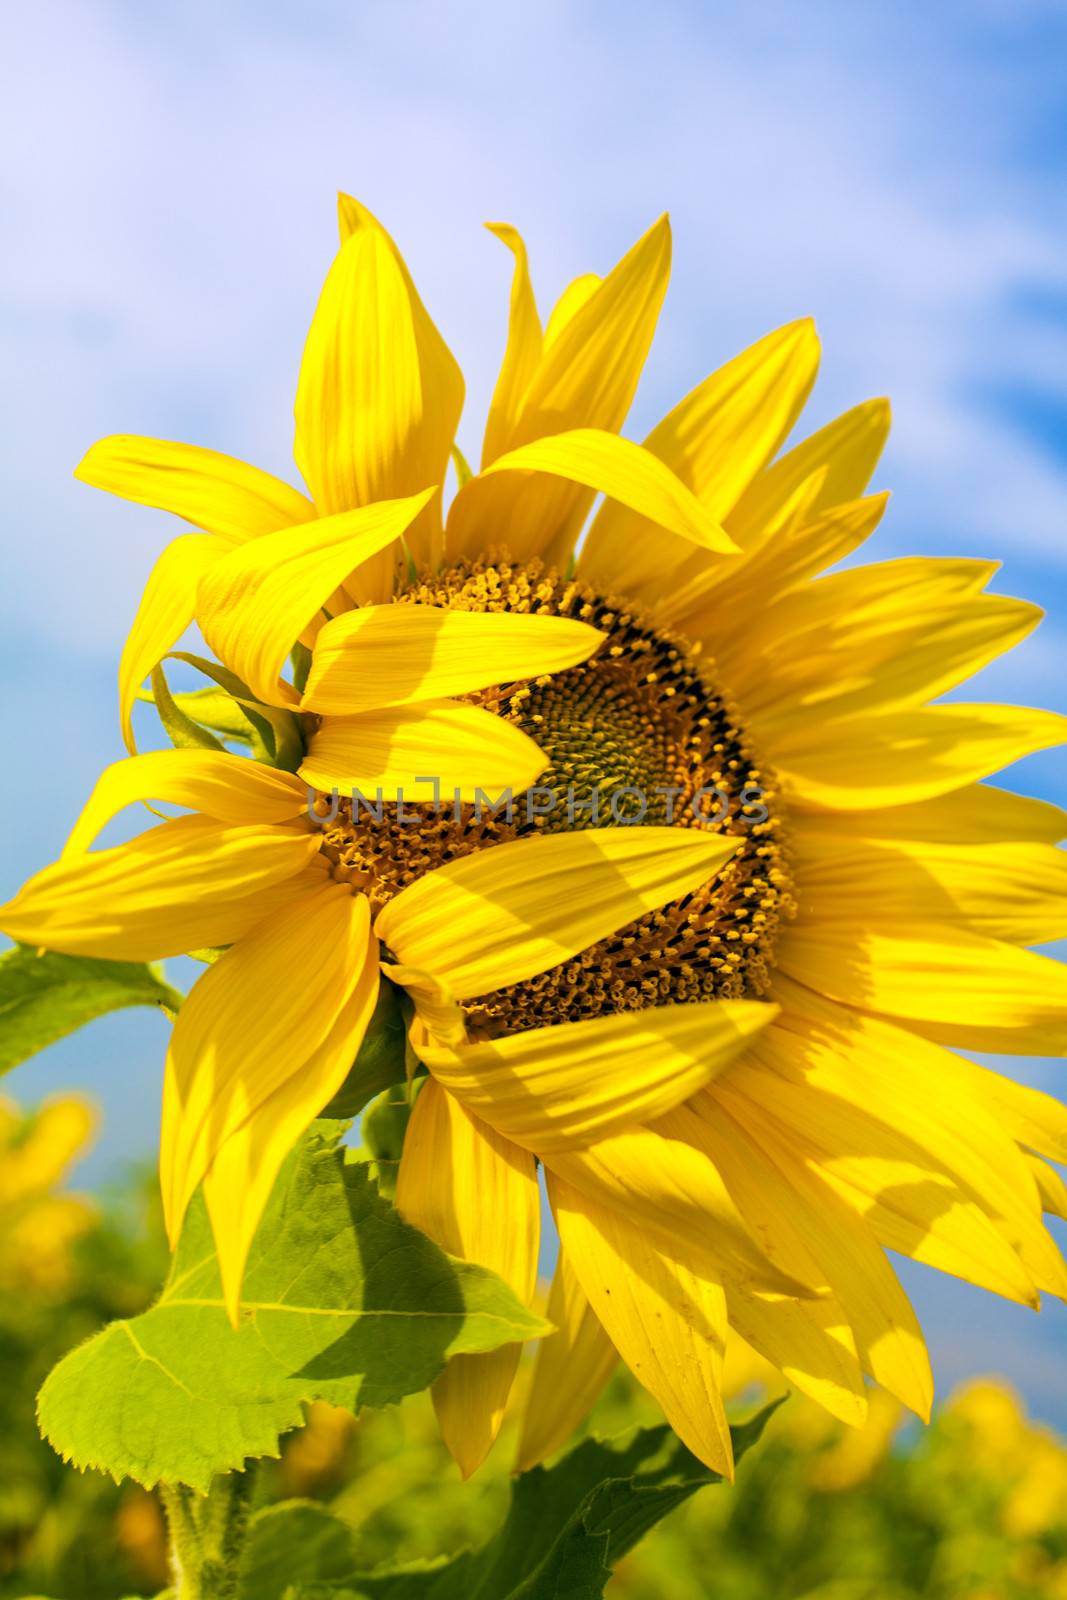 Sunflower by anelina